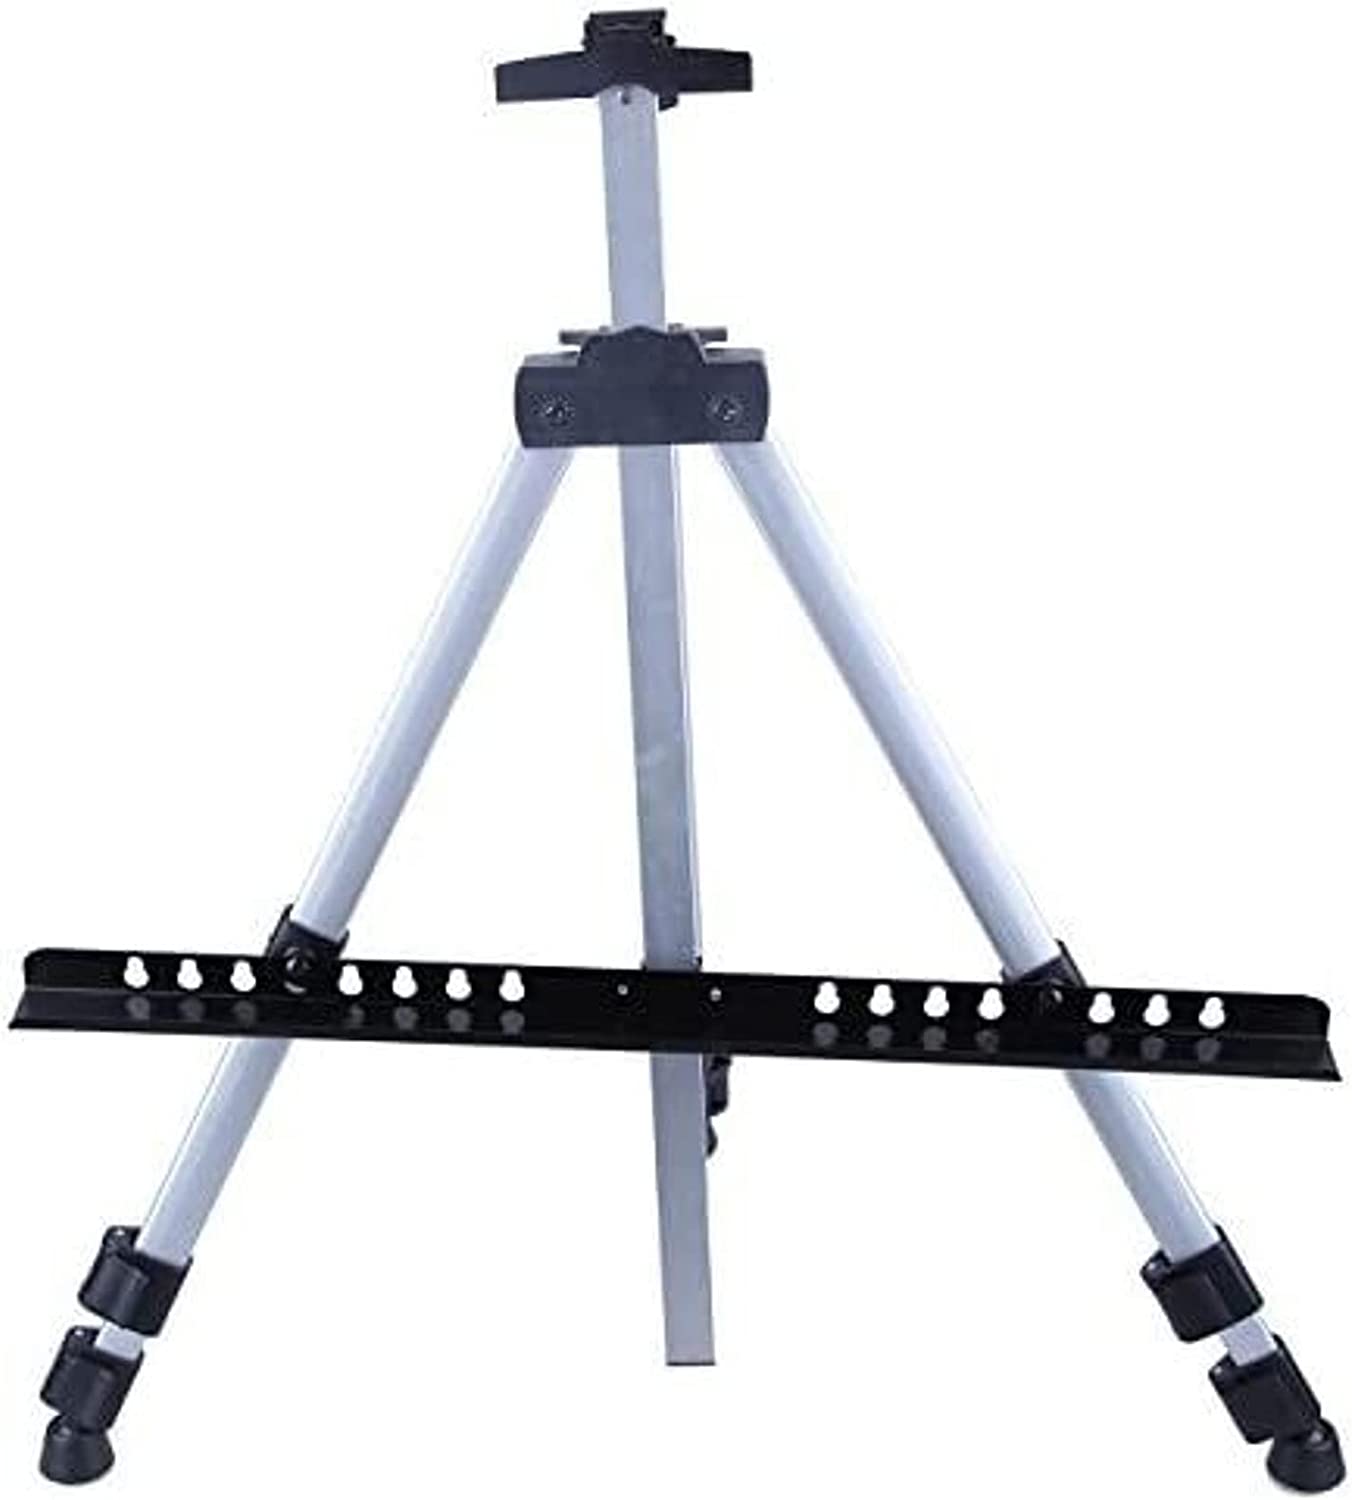 Juvale Adjustable Painting Easel for Adults and Kids, Metal Tripod Stand for Oil, Acrylic, and Watercolor Paints (Expands to 63 Inches)